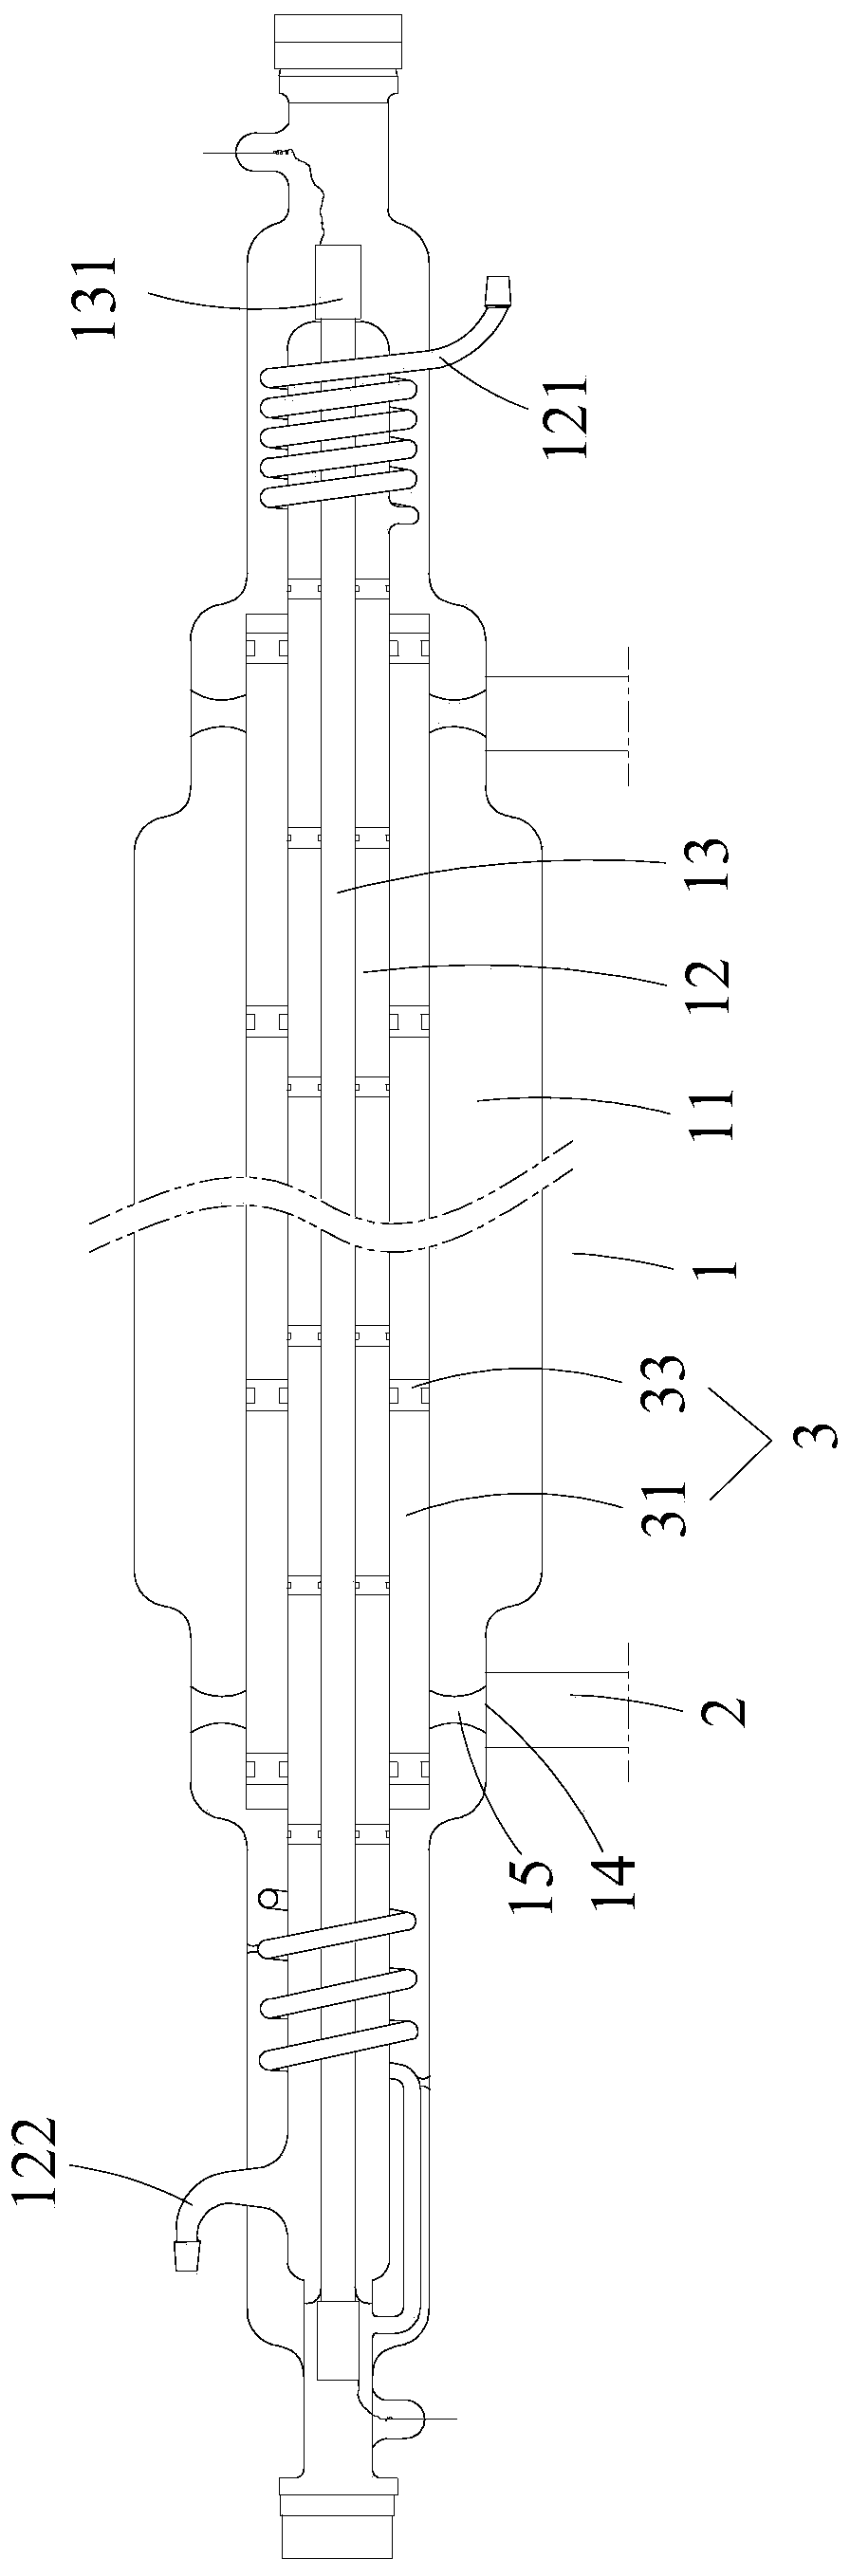 Laser apparatus having integral supporting assembly